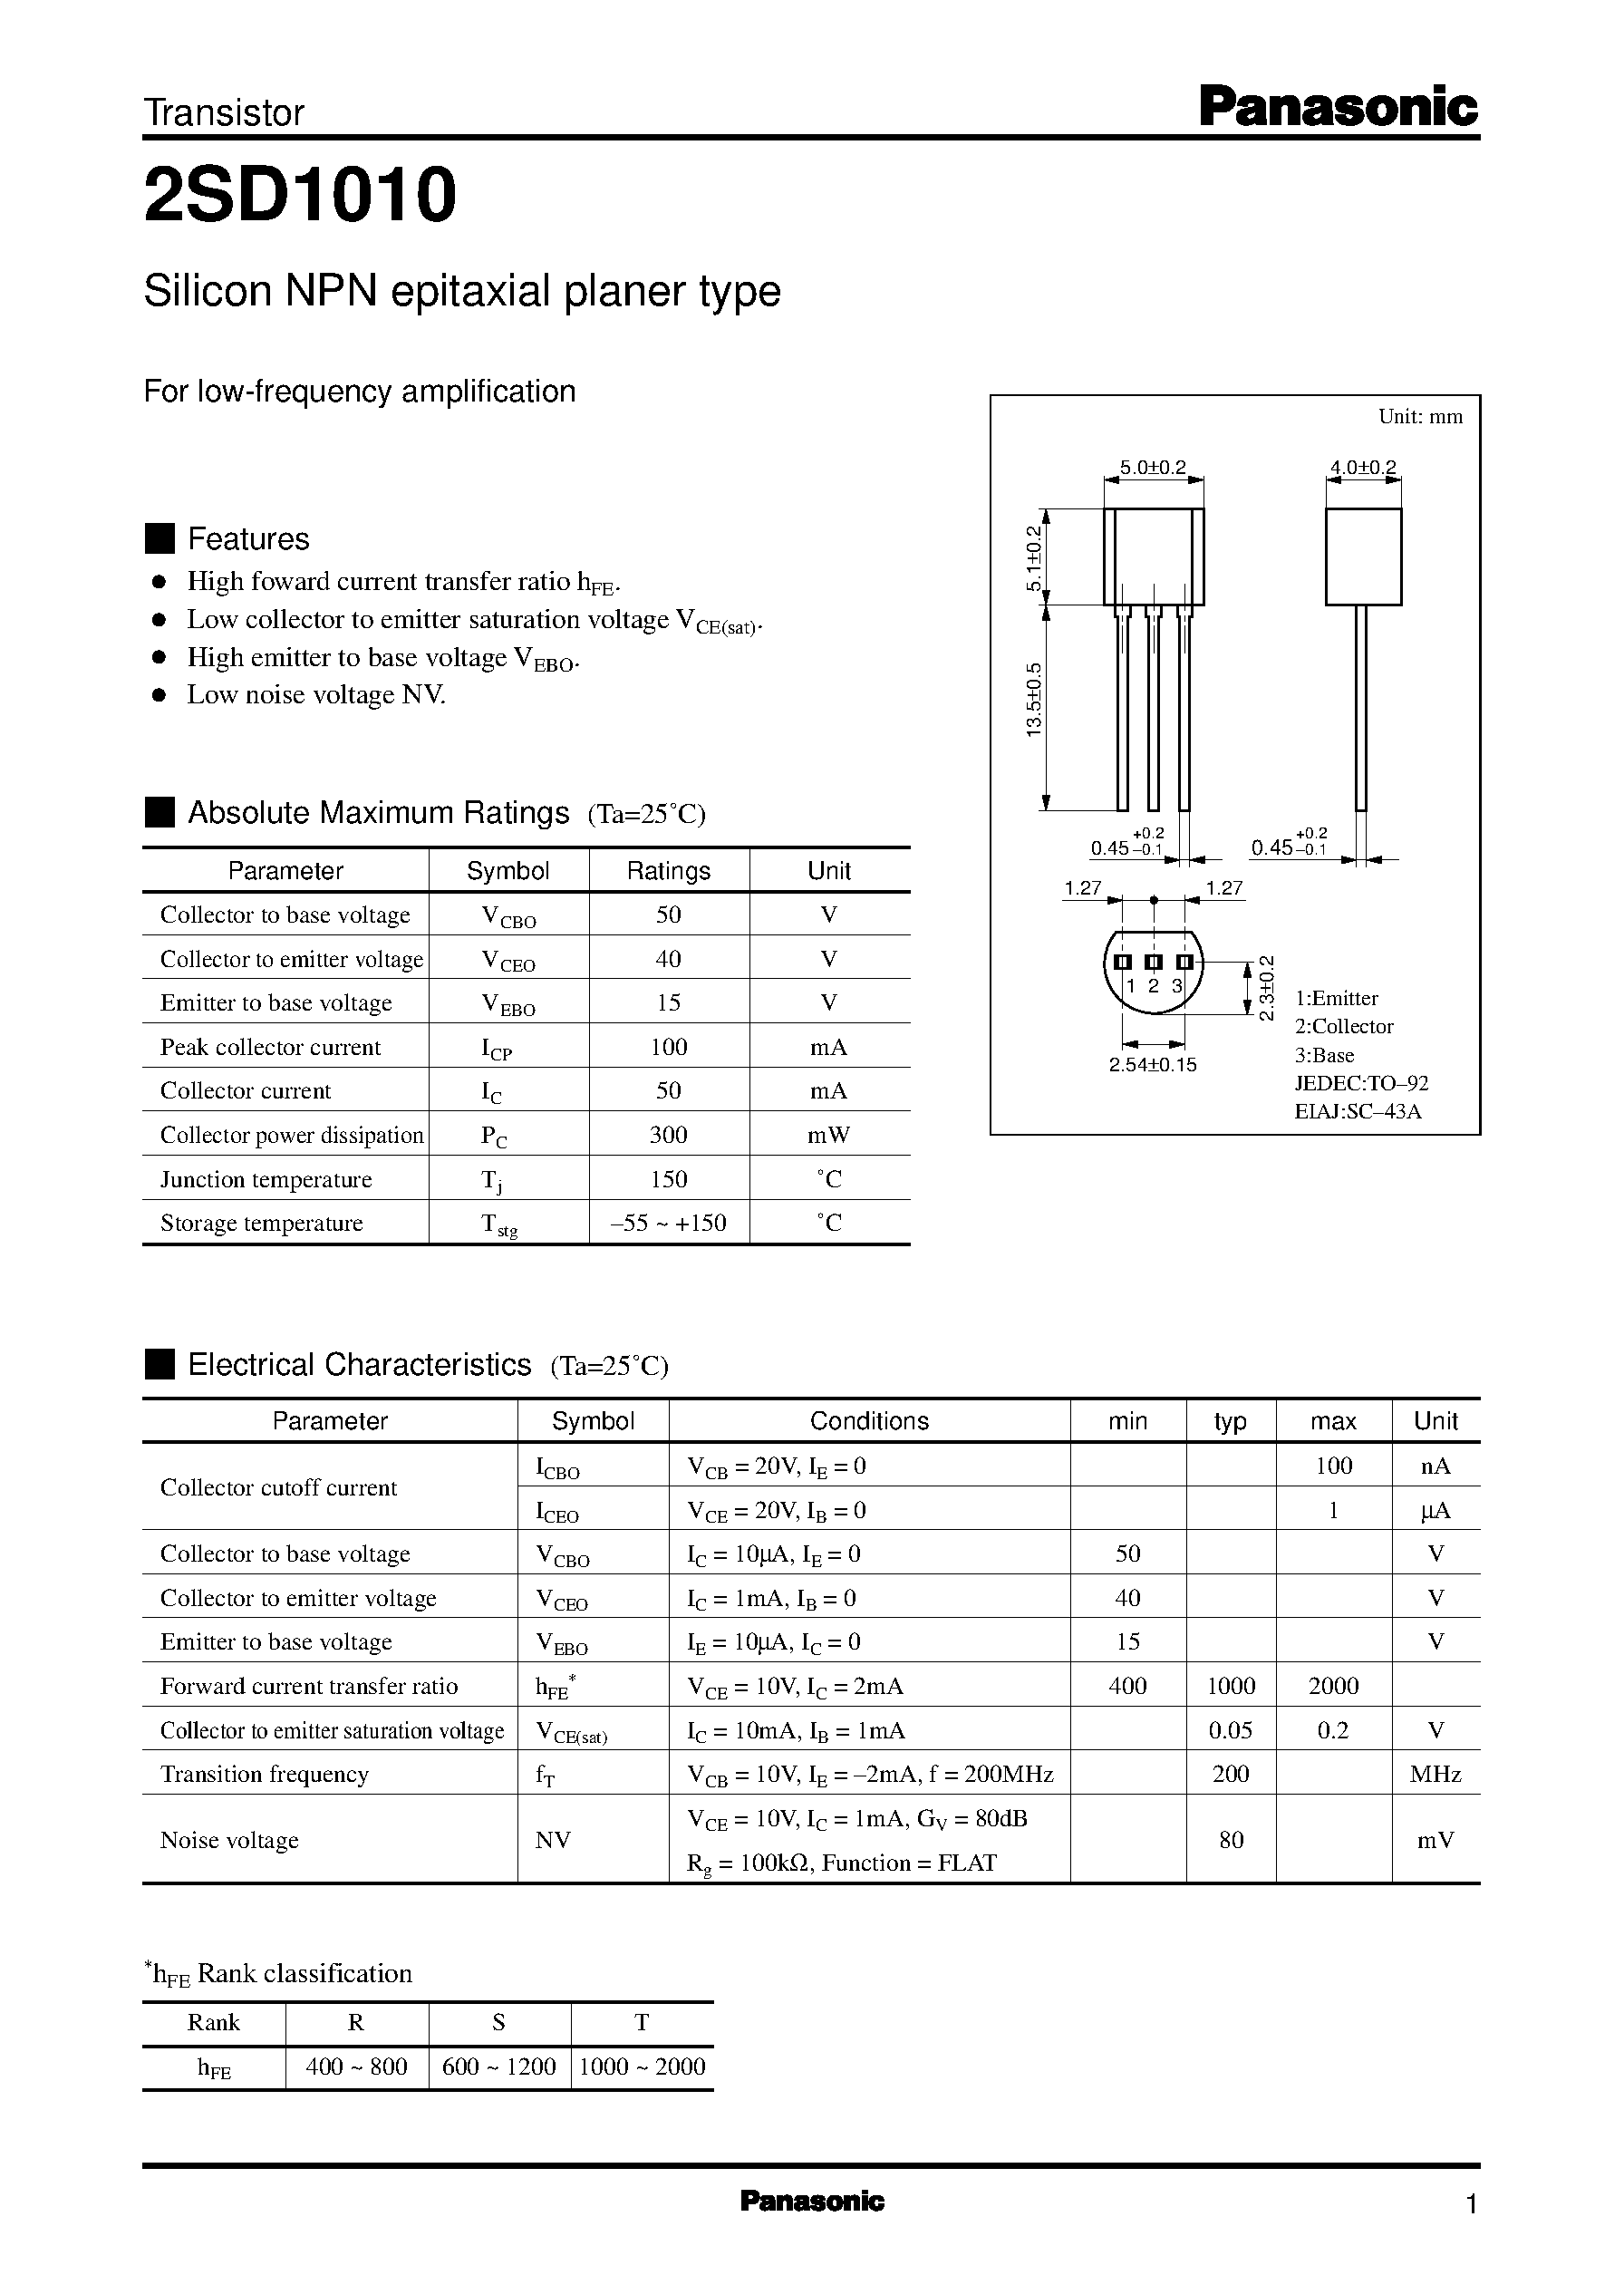 Datasheet 2SD1010 - Silicon NPN epitaxial planer type(For low-frequency amplification) page 1